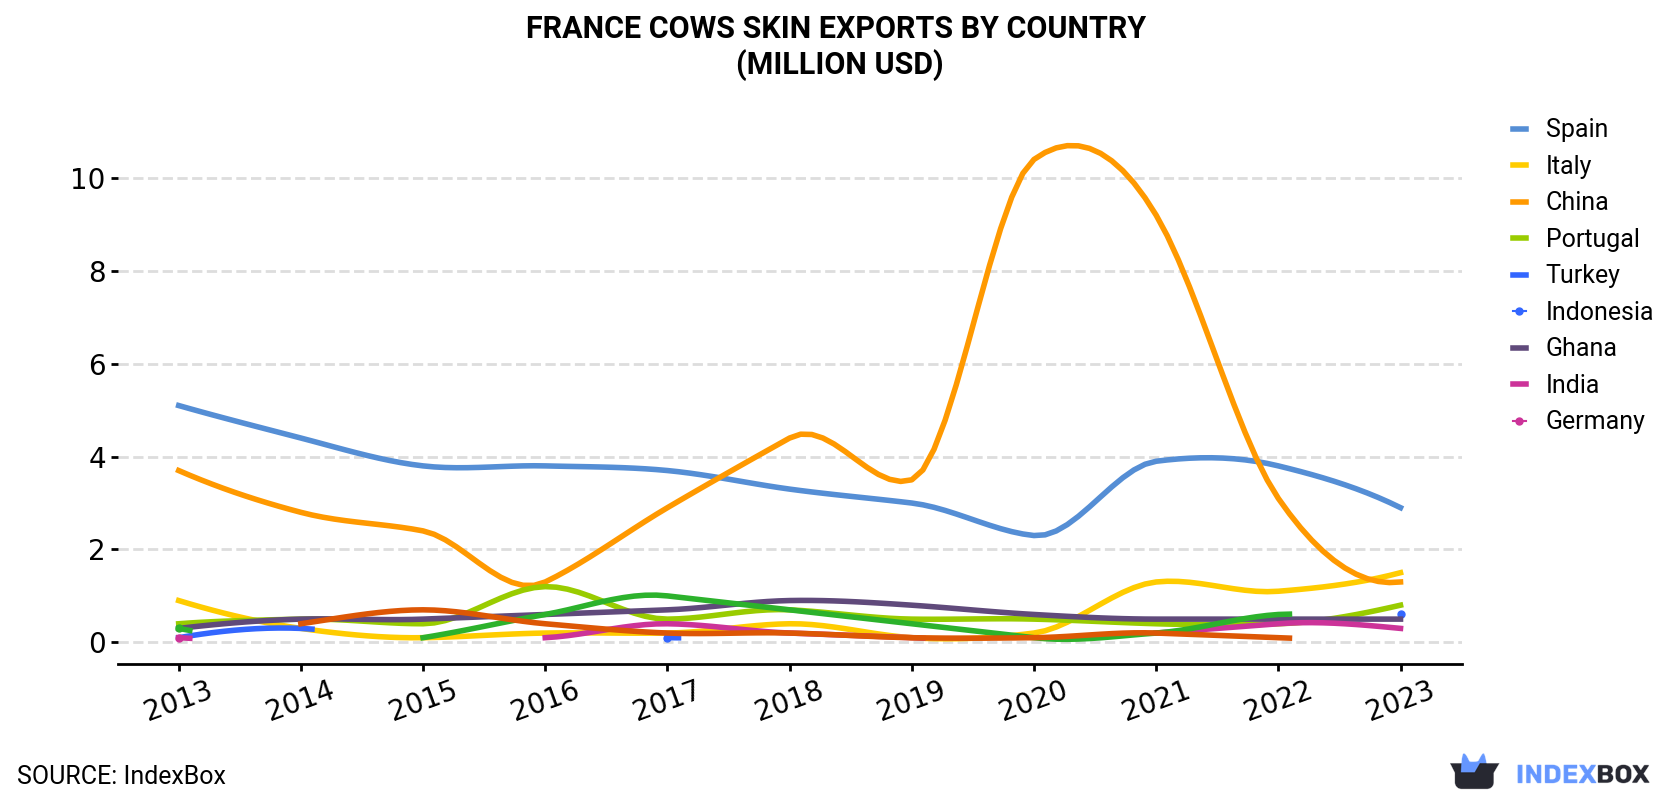 France Cows Skin Exports By Country (Million USD)